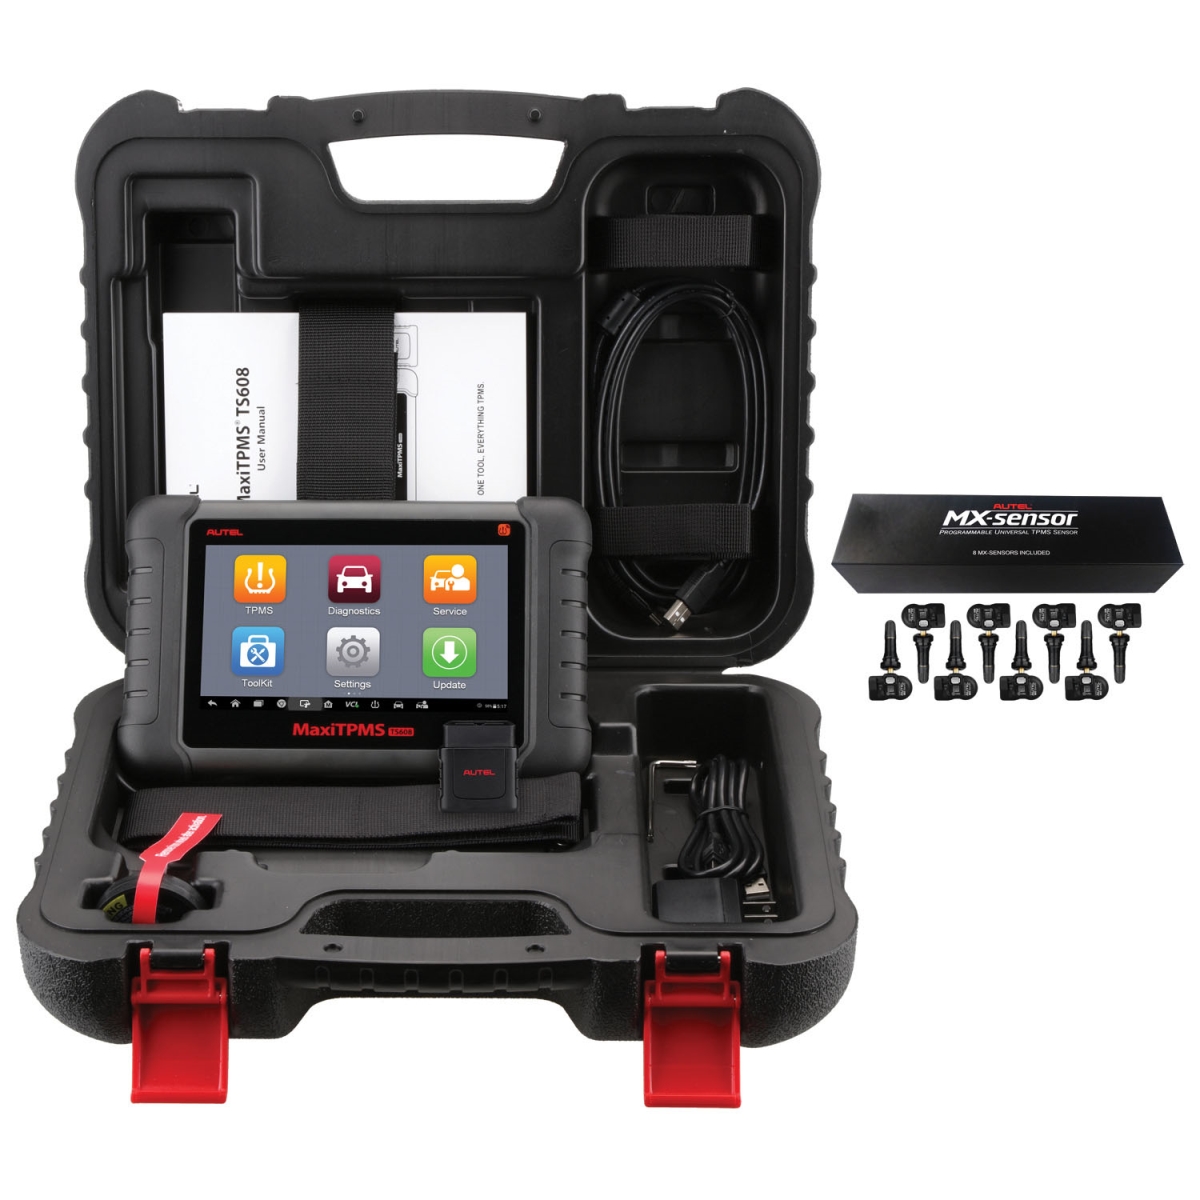 Picture of Autel AUL-700040 MaxiTPMS TS608K-1 Tool